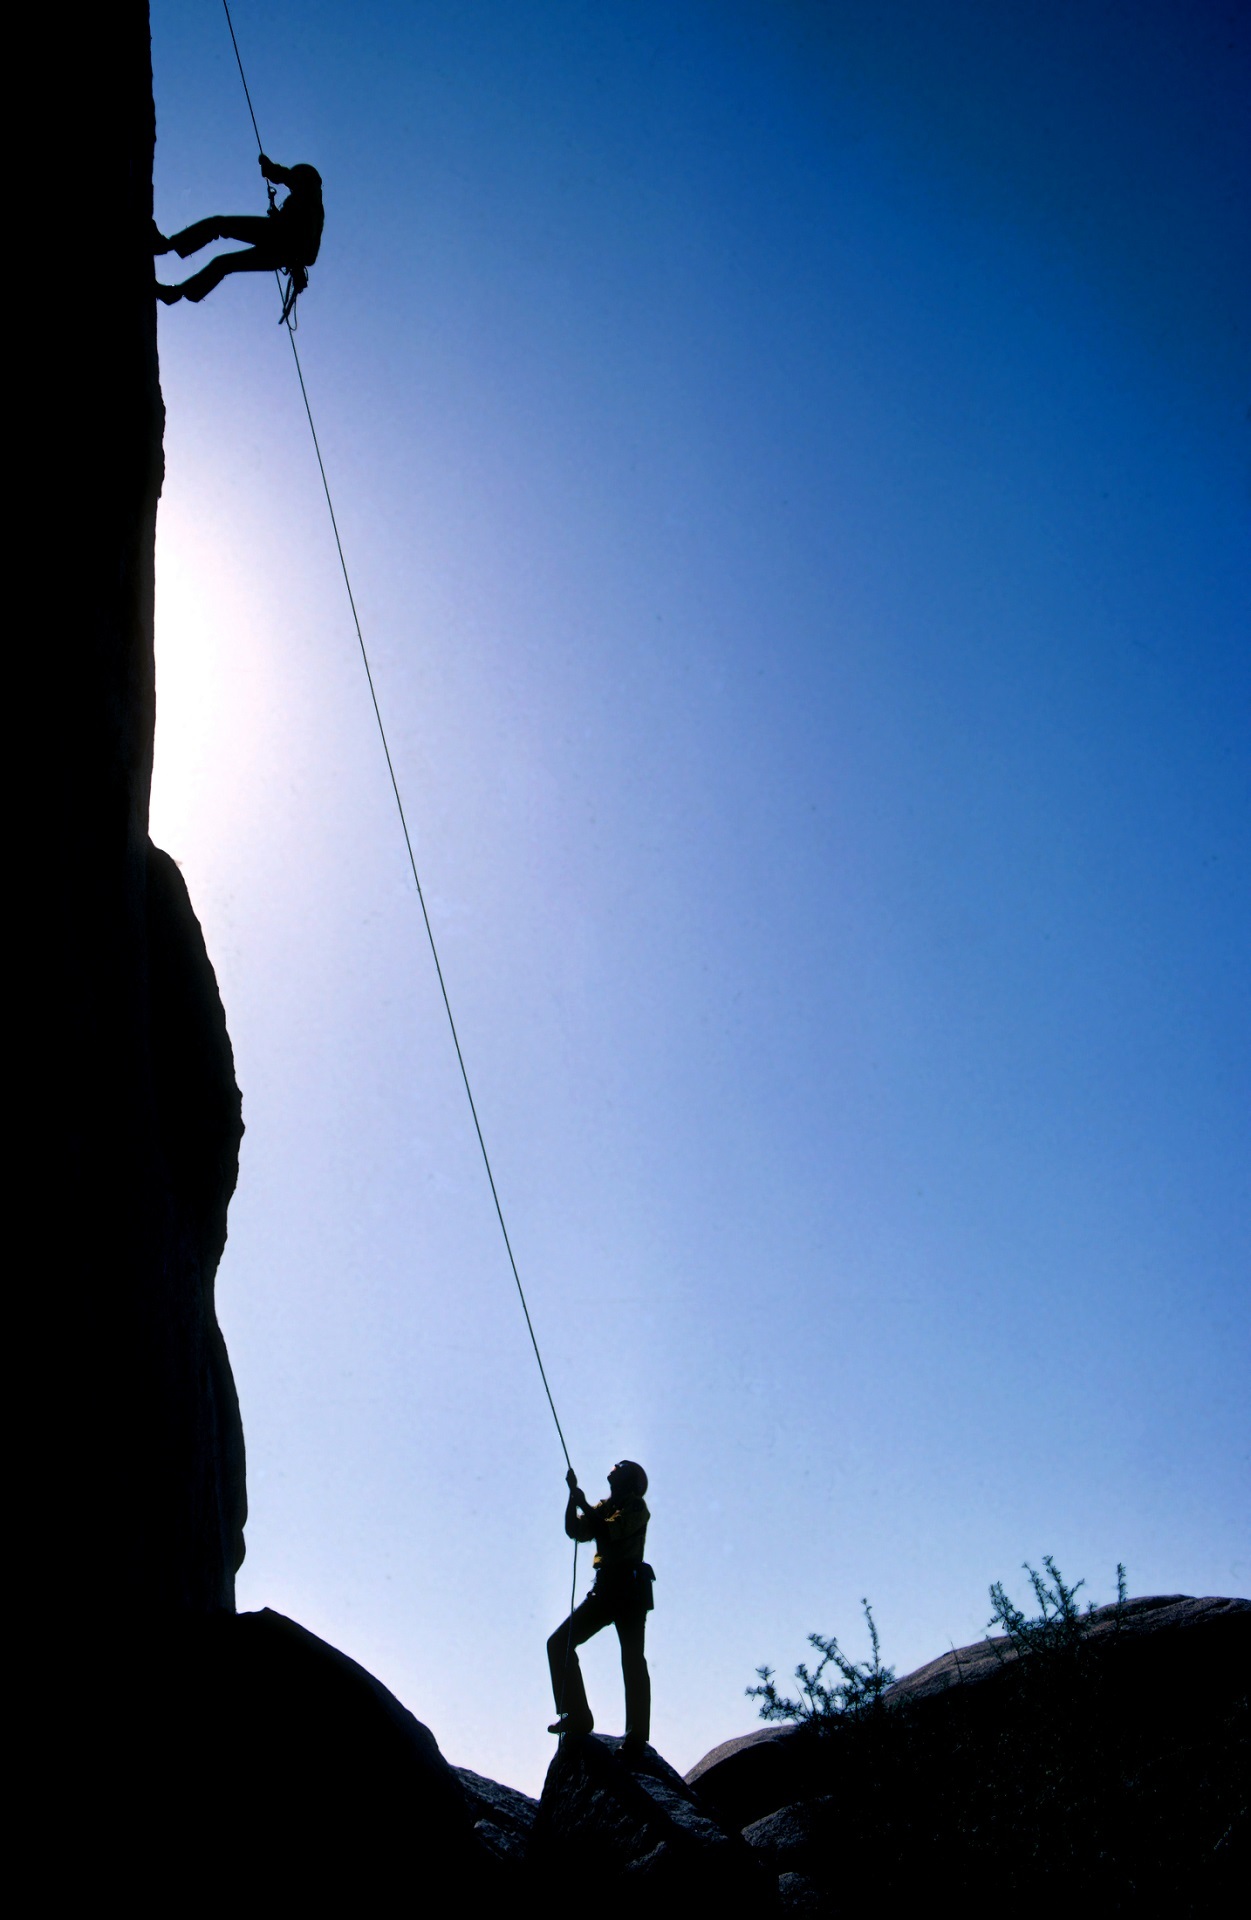 Photo of a man rappeling down a cliff-face while someone belays for him, holding the rope down on the ground.